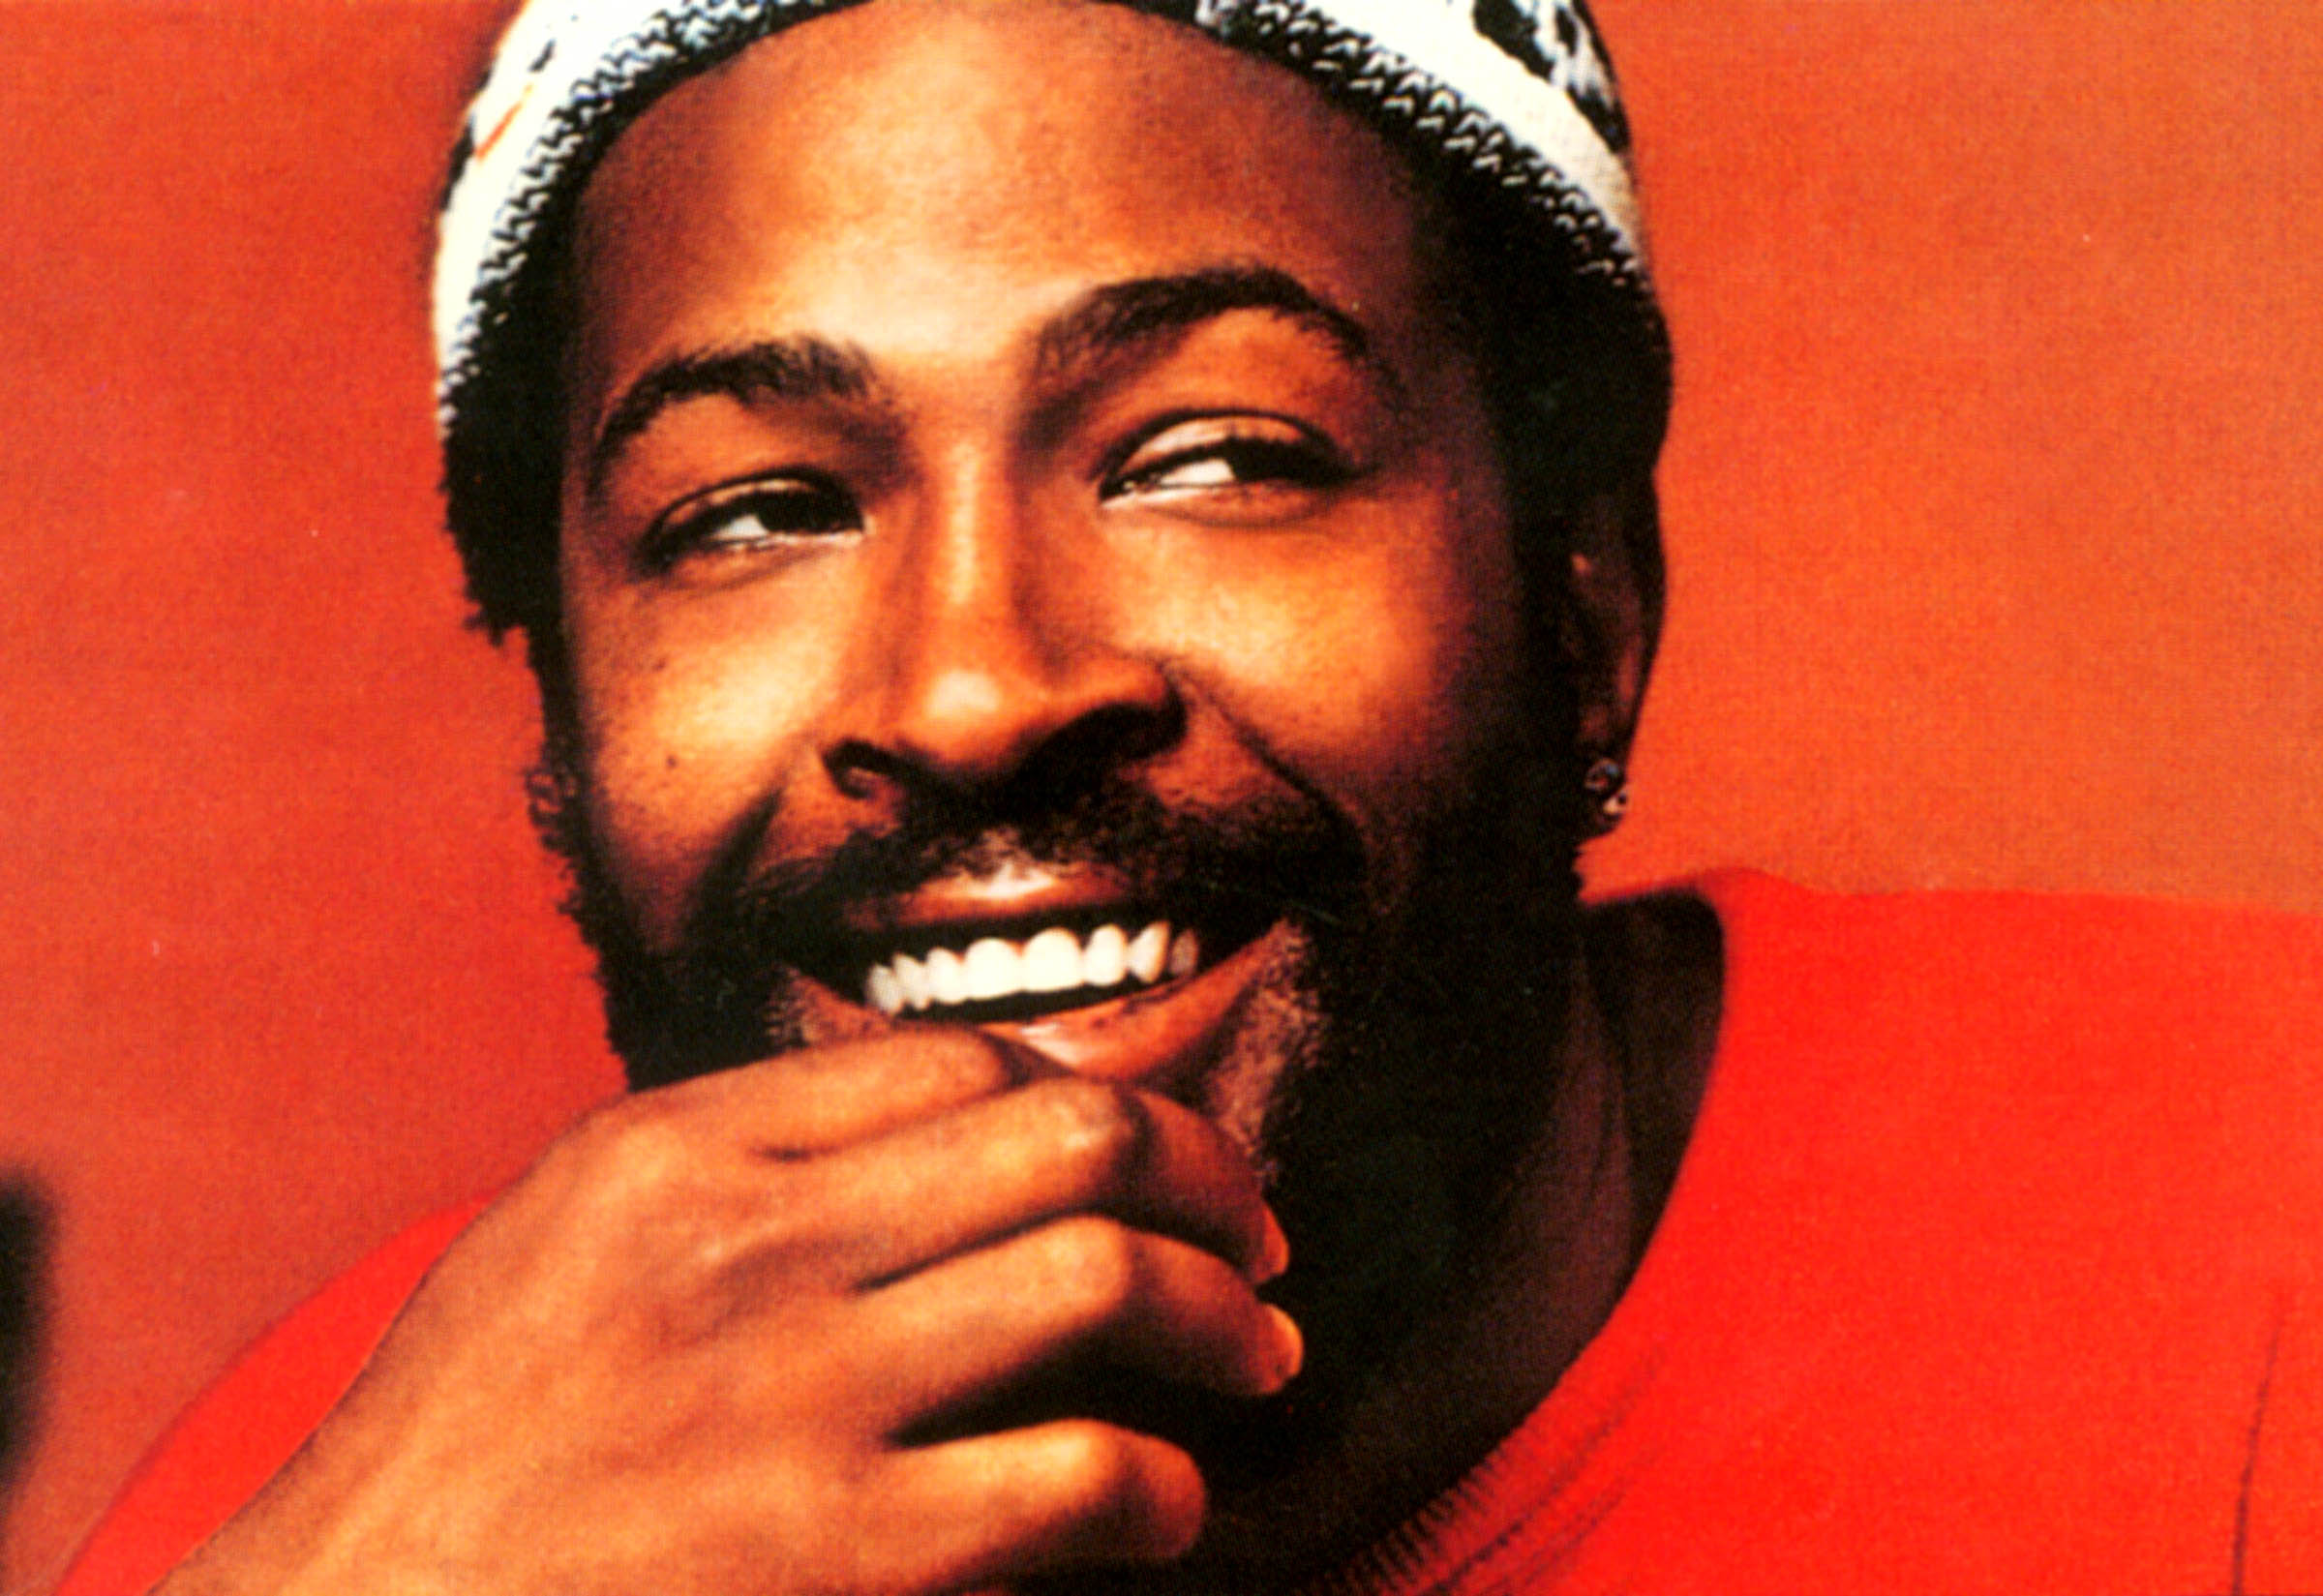 Kwame Safo aka. Funk Butcher has uploaded this superb Marvin gaye refix which he completed in Bern last month. The tack has a great vibe and cuts in the ... - artworks-000032721019-qahmeb-original